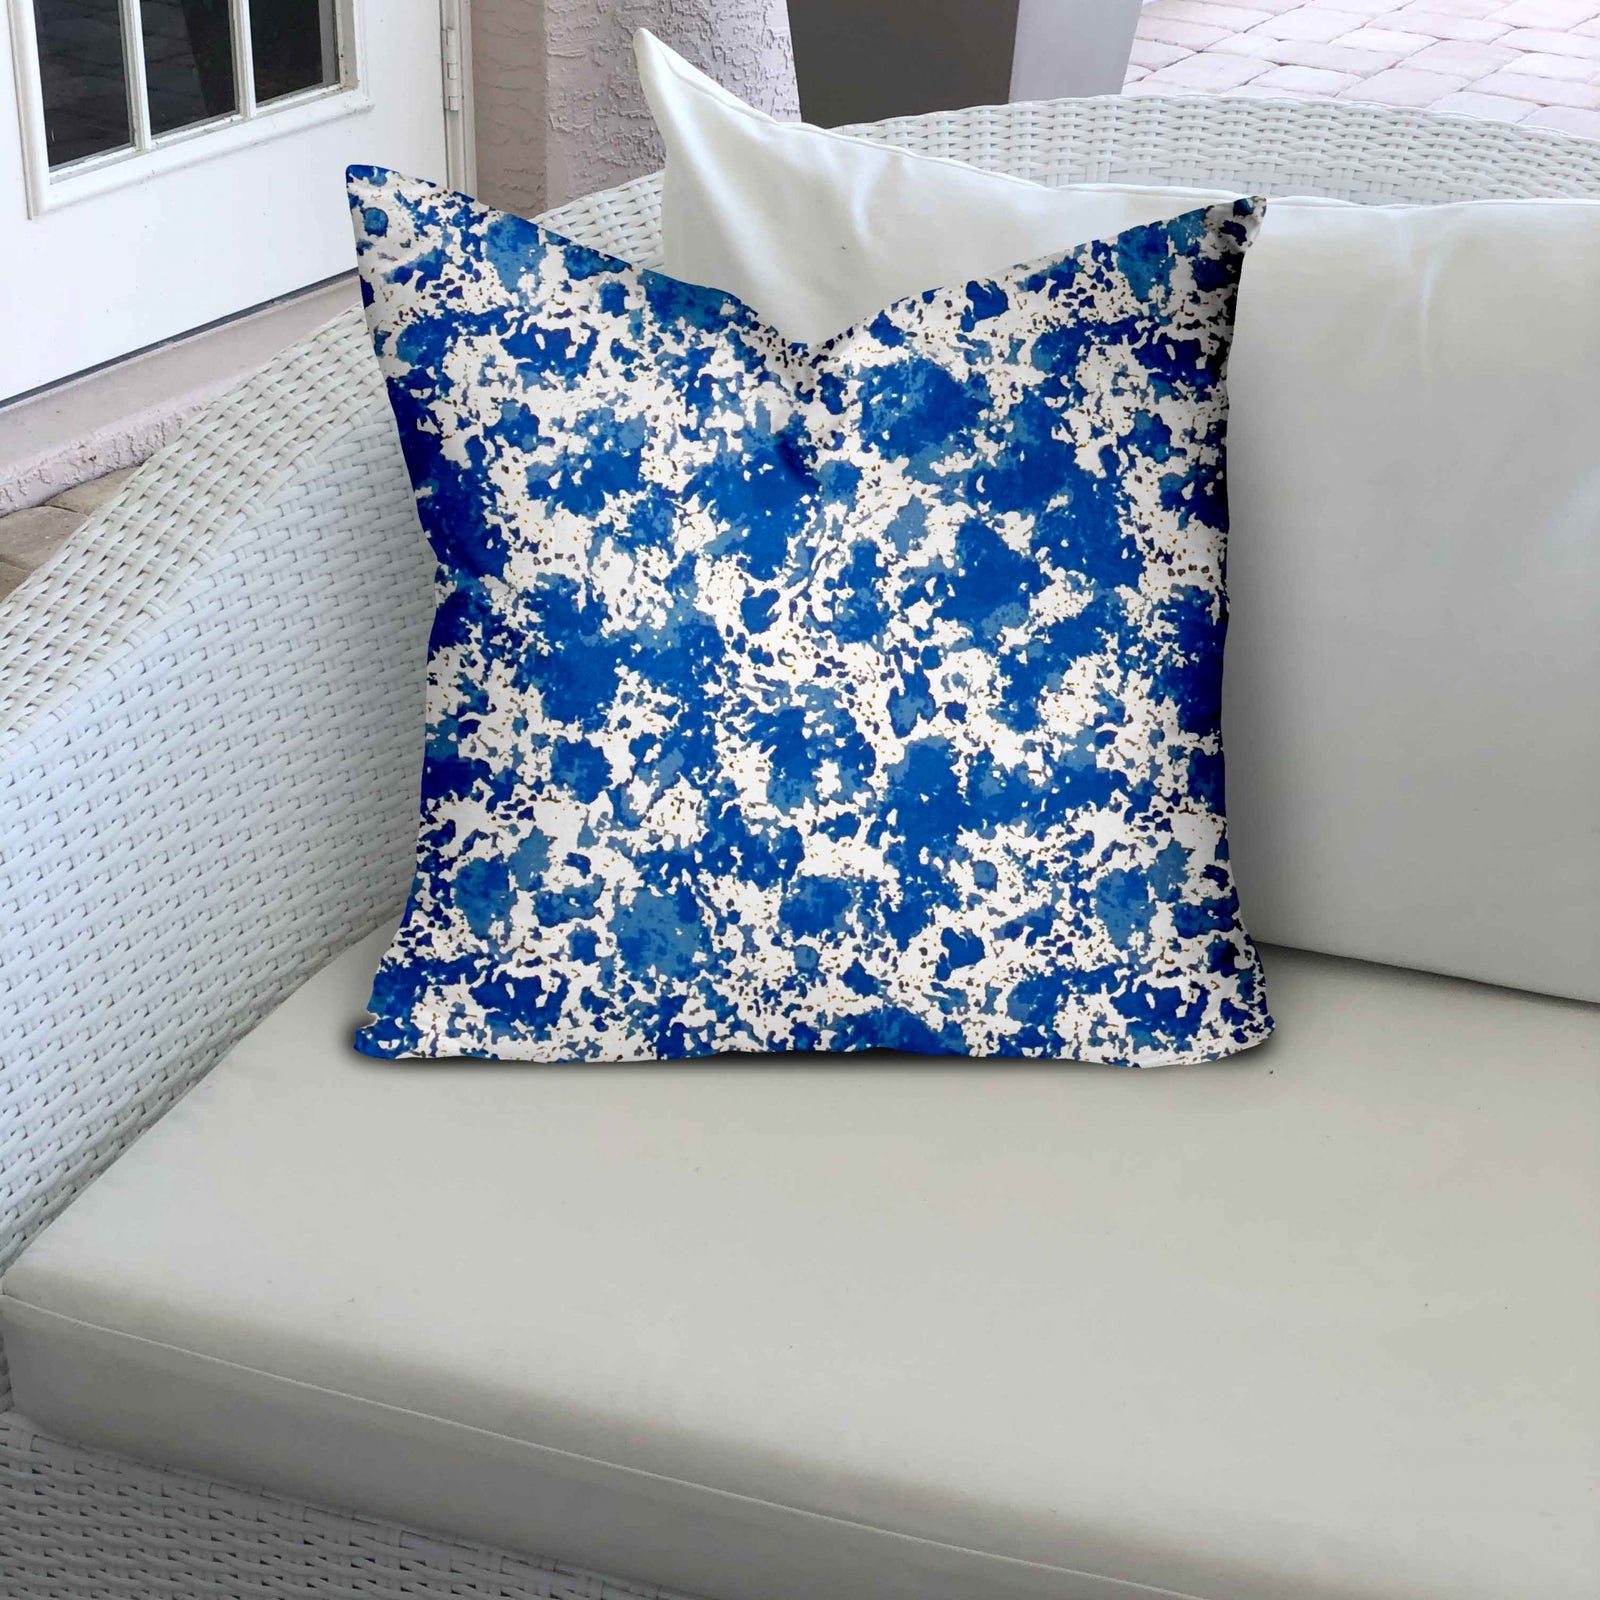 18" X 18" Blue And White Zippered Coastal Throw Indoor Outdoor Pillow